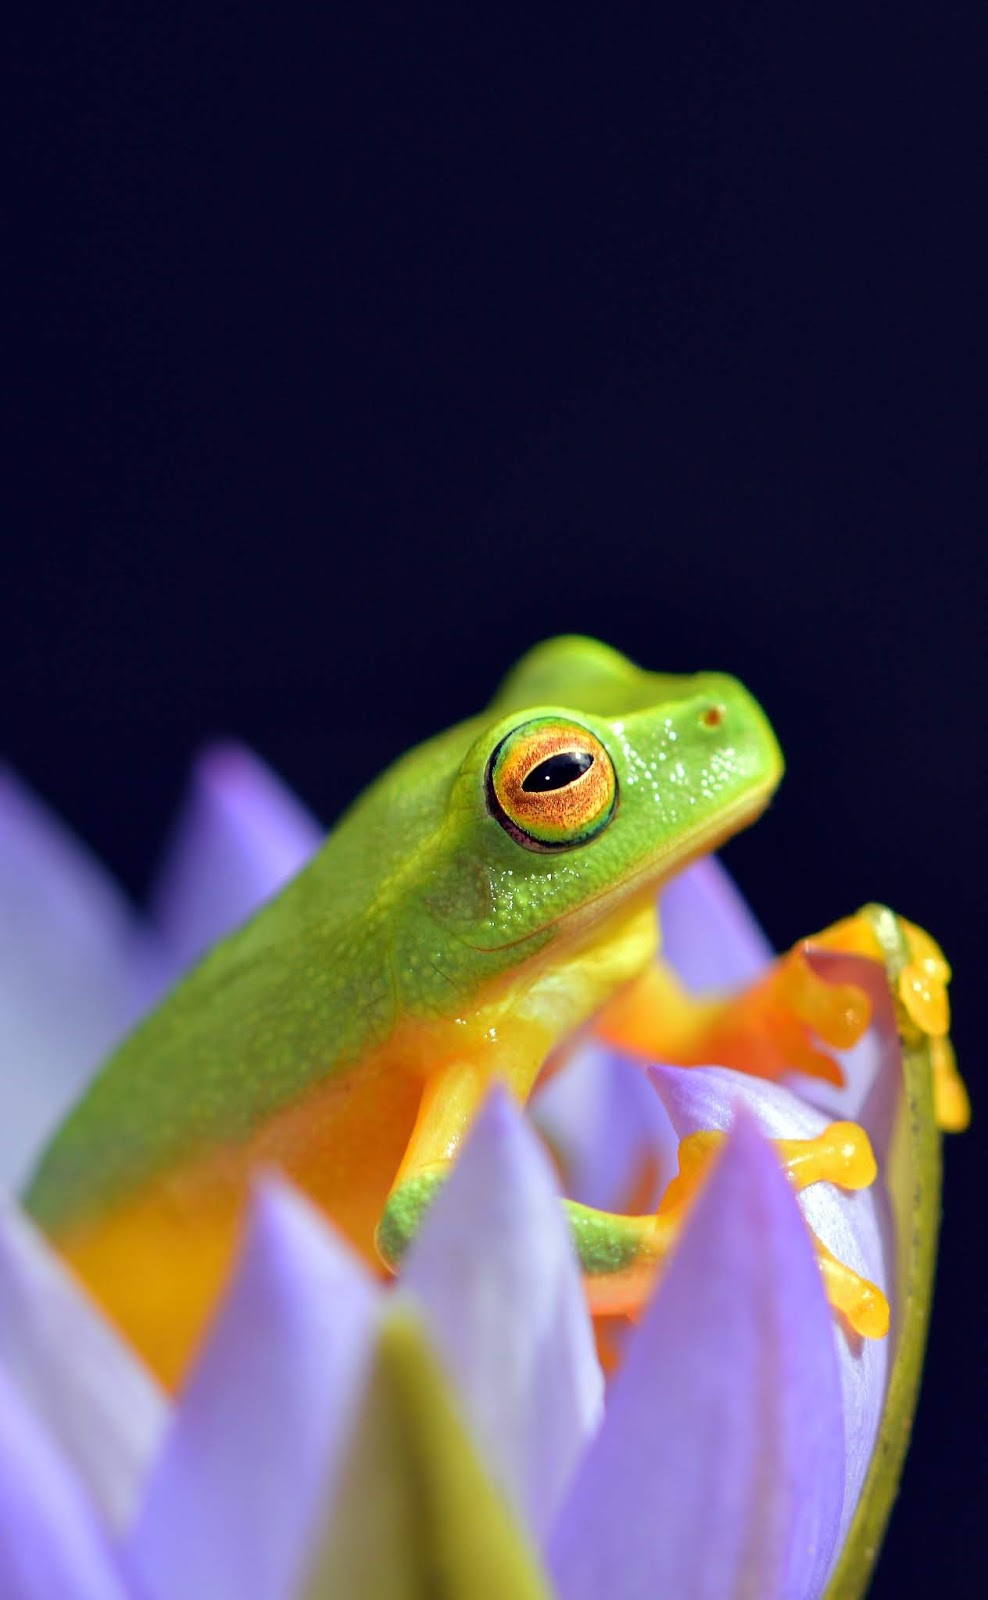 Picture of a dainty green tree frog.